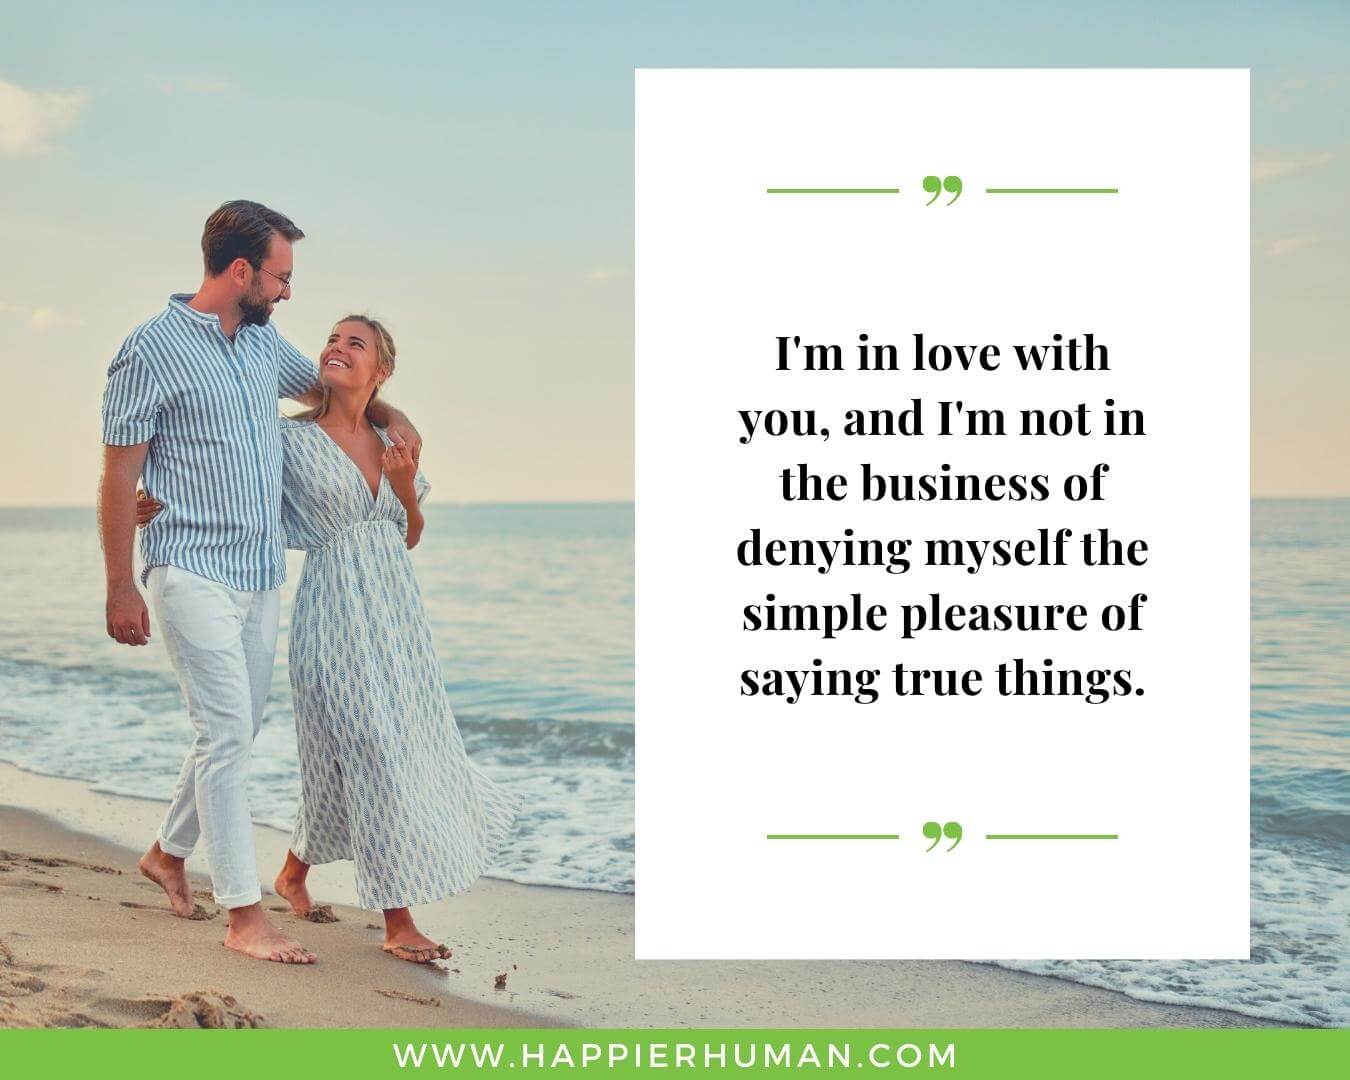 Unconditional Love Quotes for Her - “I'm in love with you, and I'm not in the business of denying myself the simple pleasure of saying true things.” 